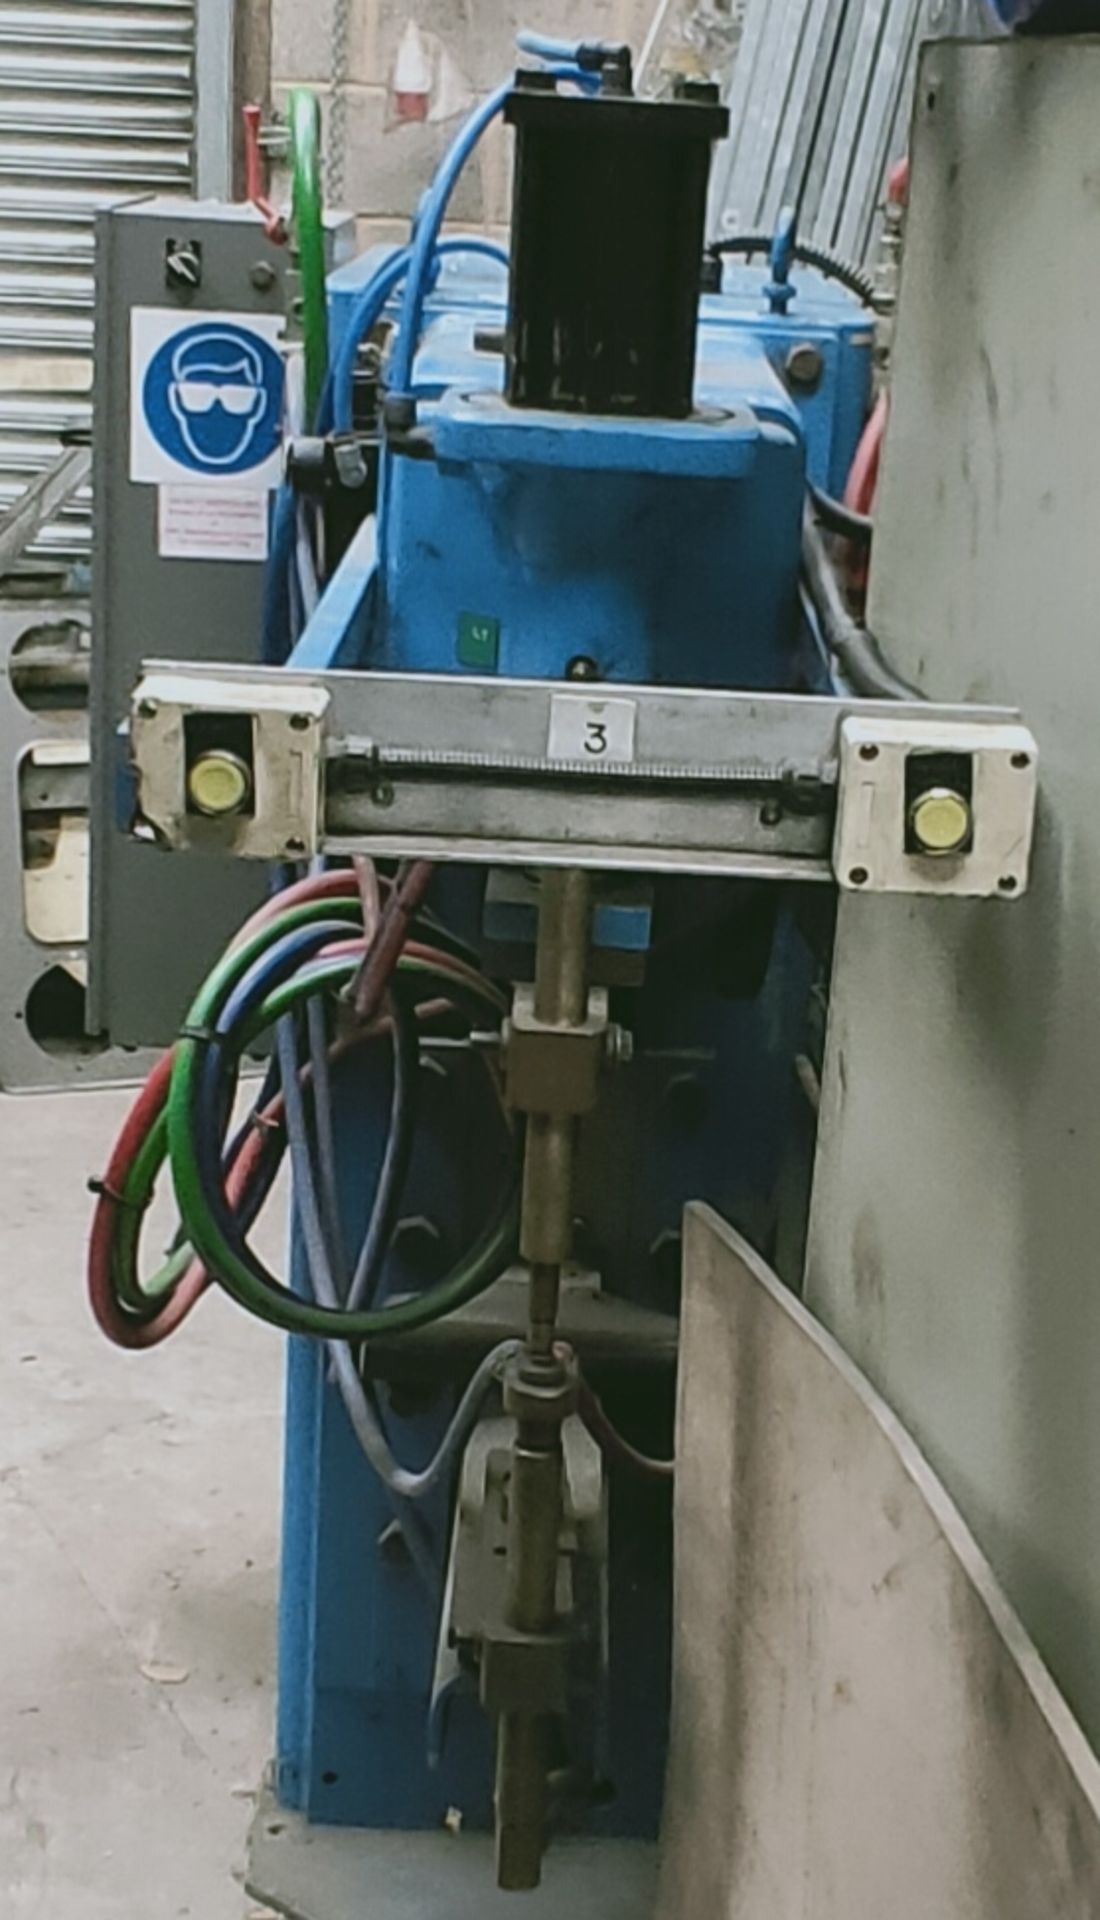 British Federal WS2000 Spot Welder/ Pro Spot, approx. 160cm x 180cm x 65cm, loading free of charge - - Image 3 of 5